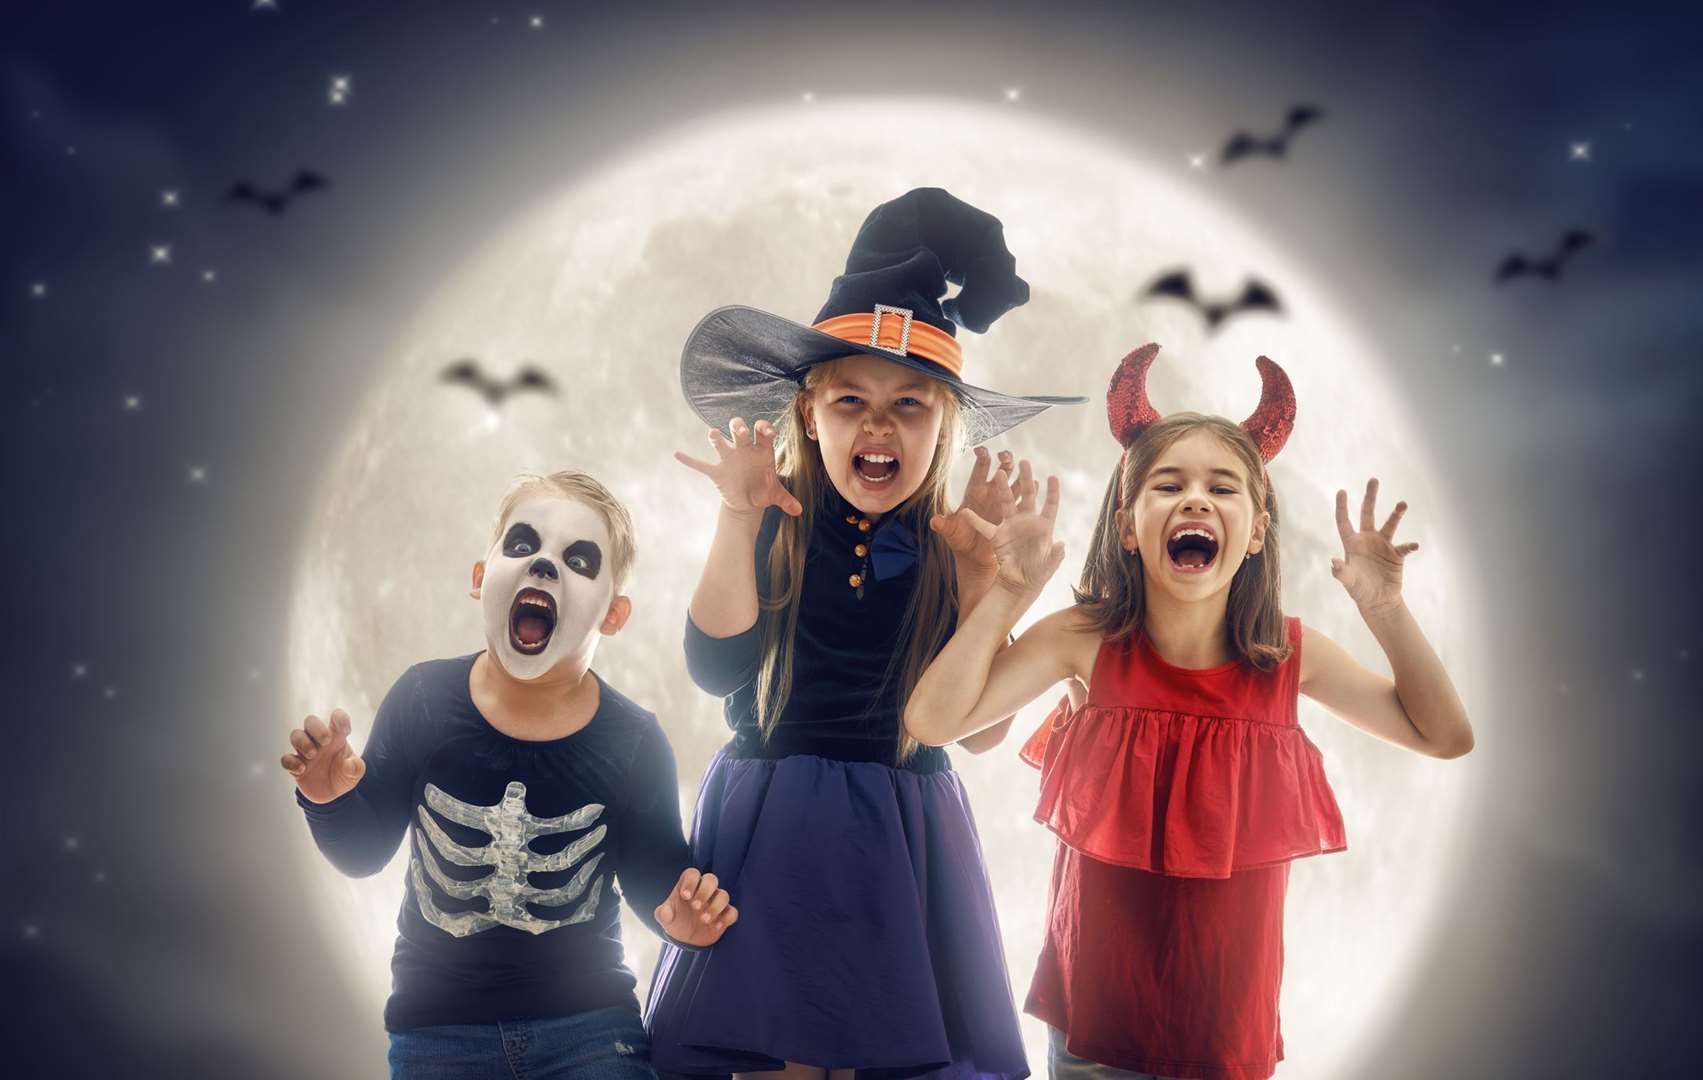 Keep safe when out trick or treating this Halloween